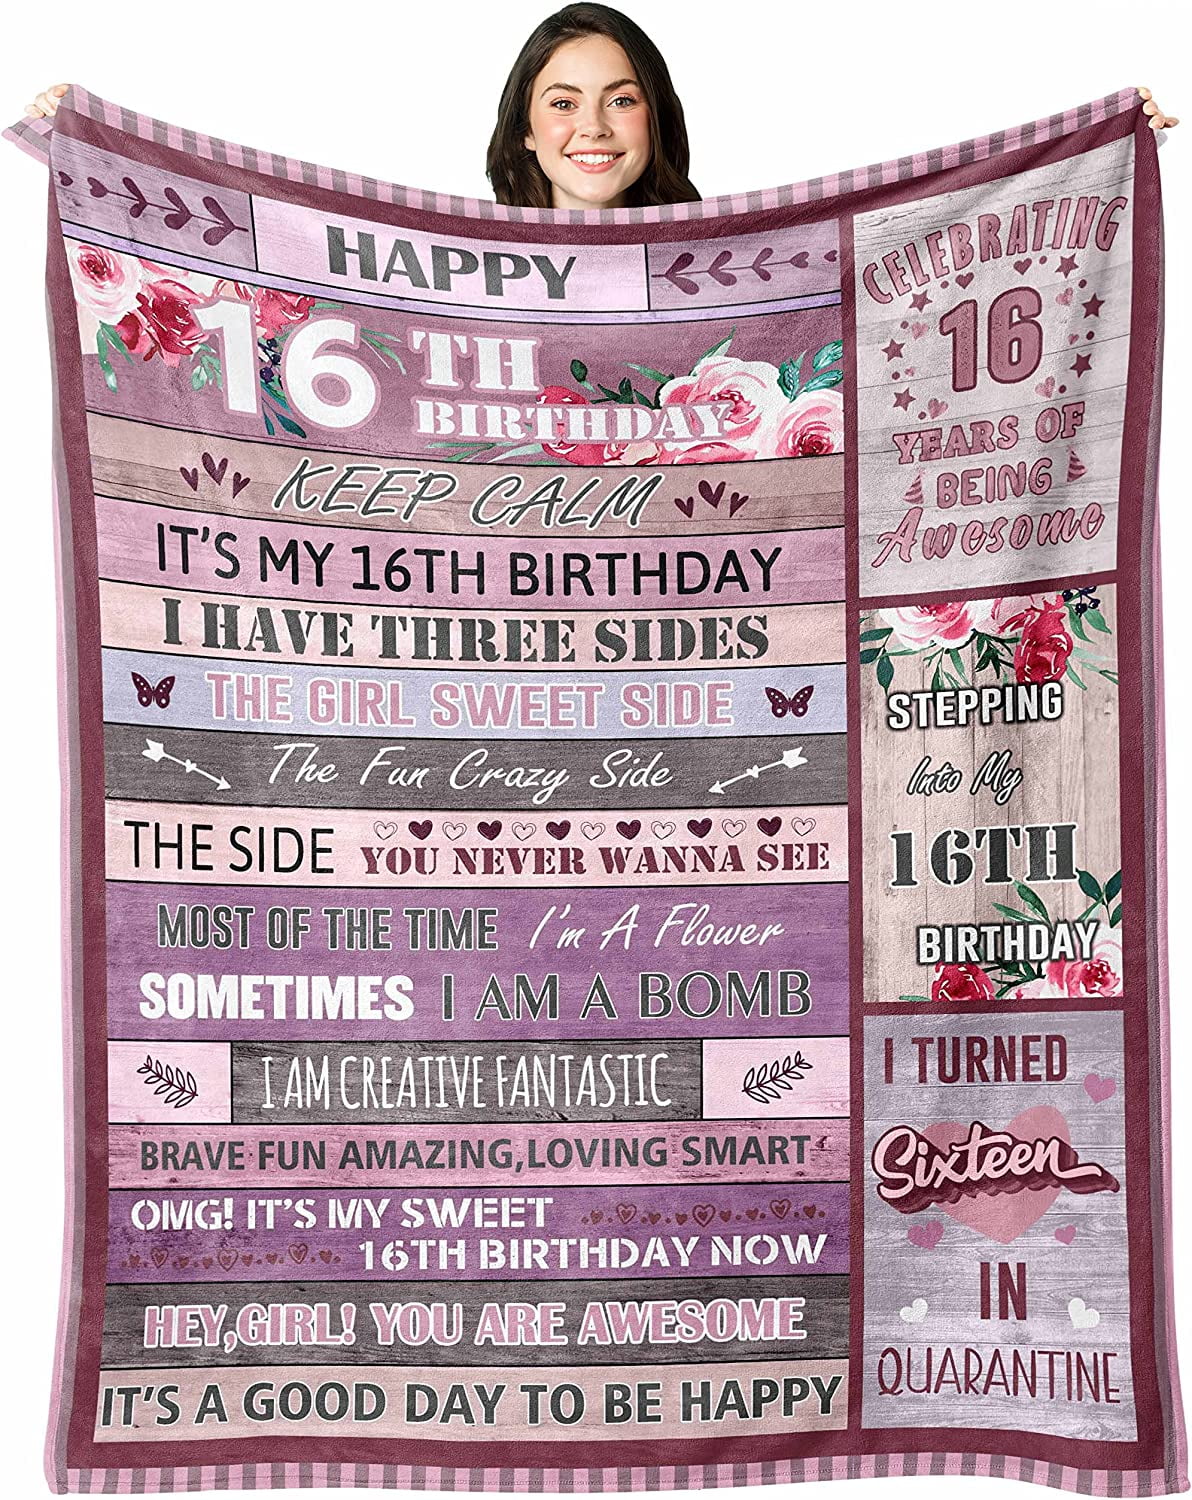 Losuites Blanket Gift for 11 Year Old Girl-11 Year Old Girl Gifts,Birthday Gifts for 11 Year Old Girls-11th Birthday Decorations for Girl,Best Gifts